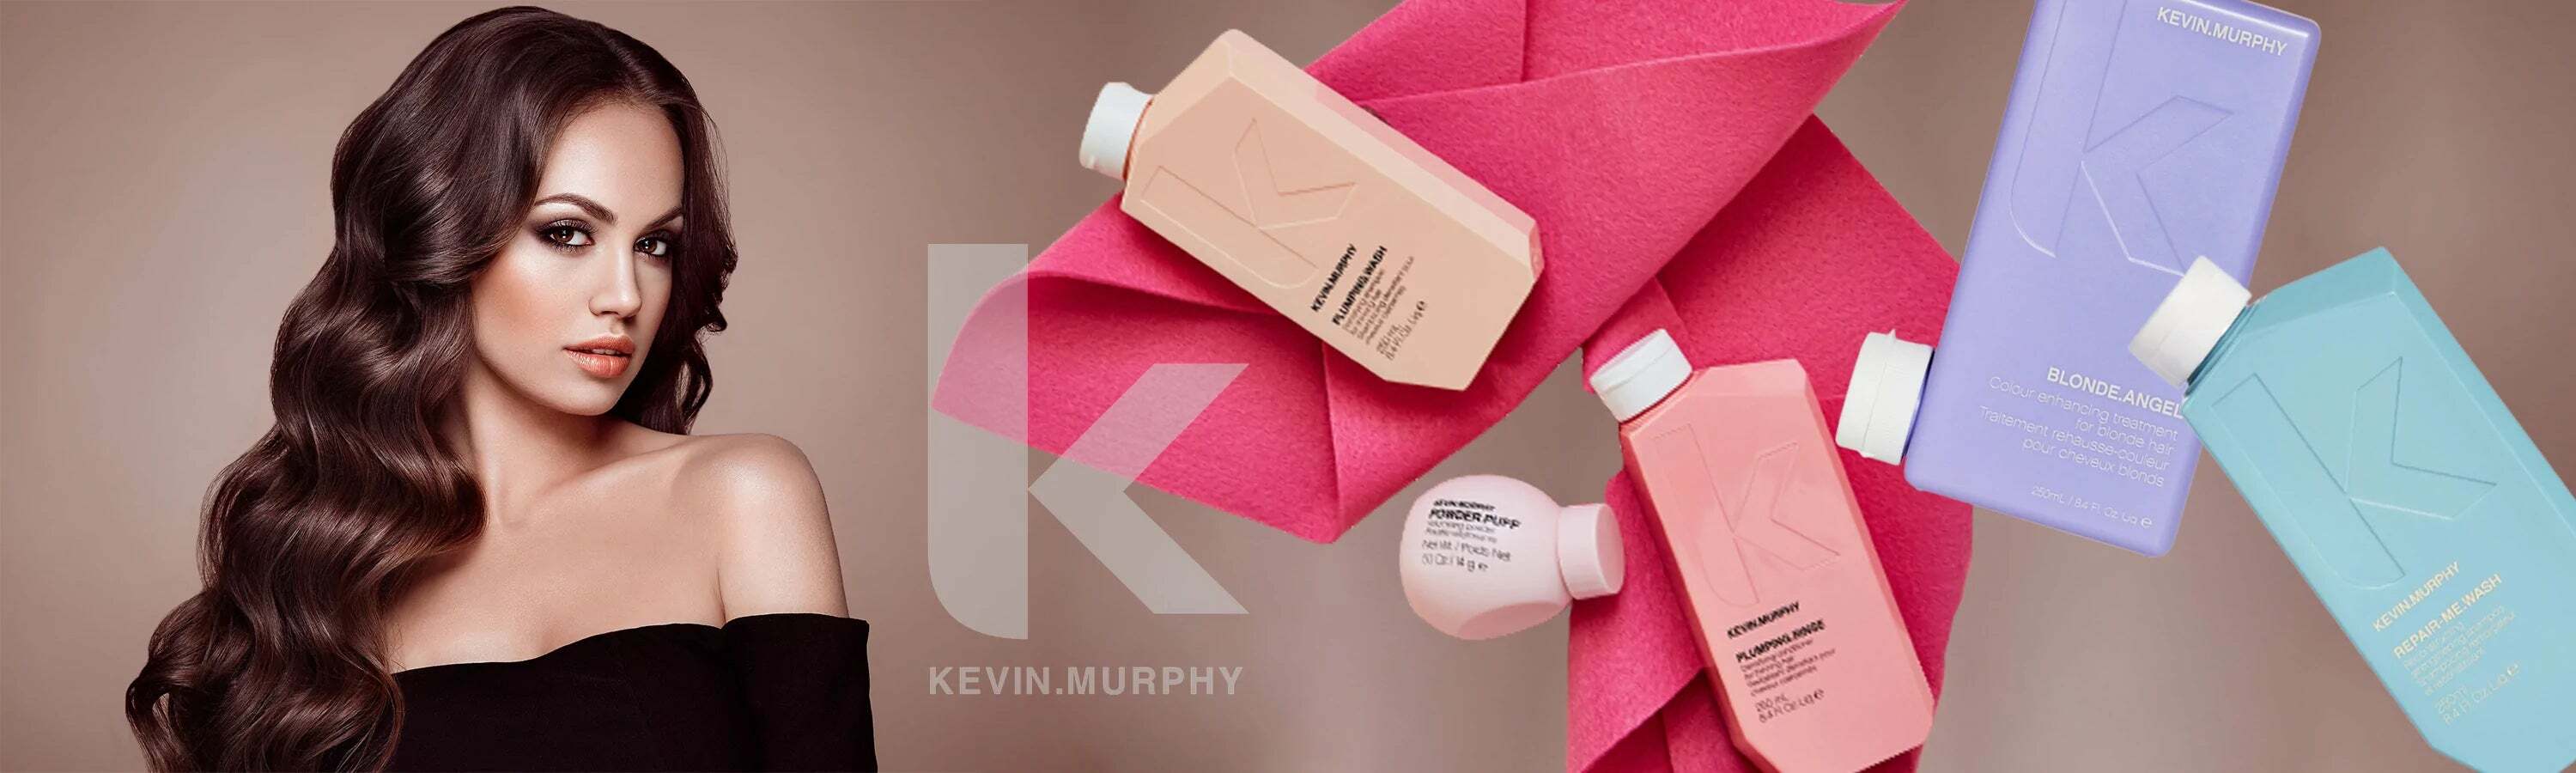 Discover the secret to gorgeous, salon-worthy hair with Kevin Murphy's premium range of haircare products. From nourishing shampoos to styling essentials, Kevin Murphy offers innovative formulas crafted with high-quality ingredients for every hair type. Shop now and experience the difference with Kevin Murphy.